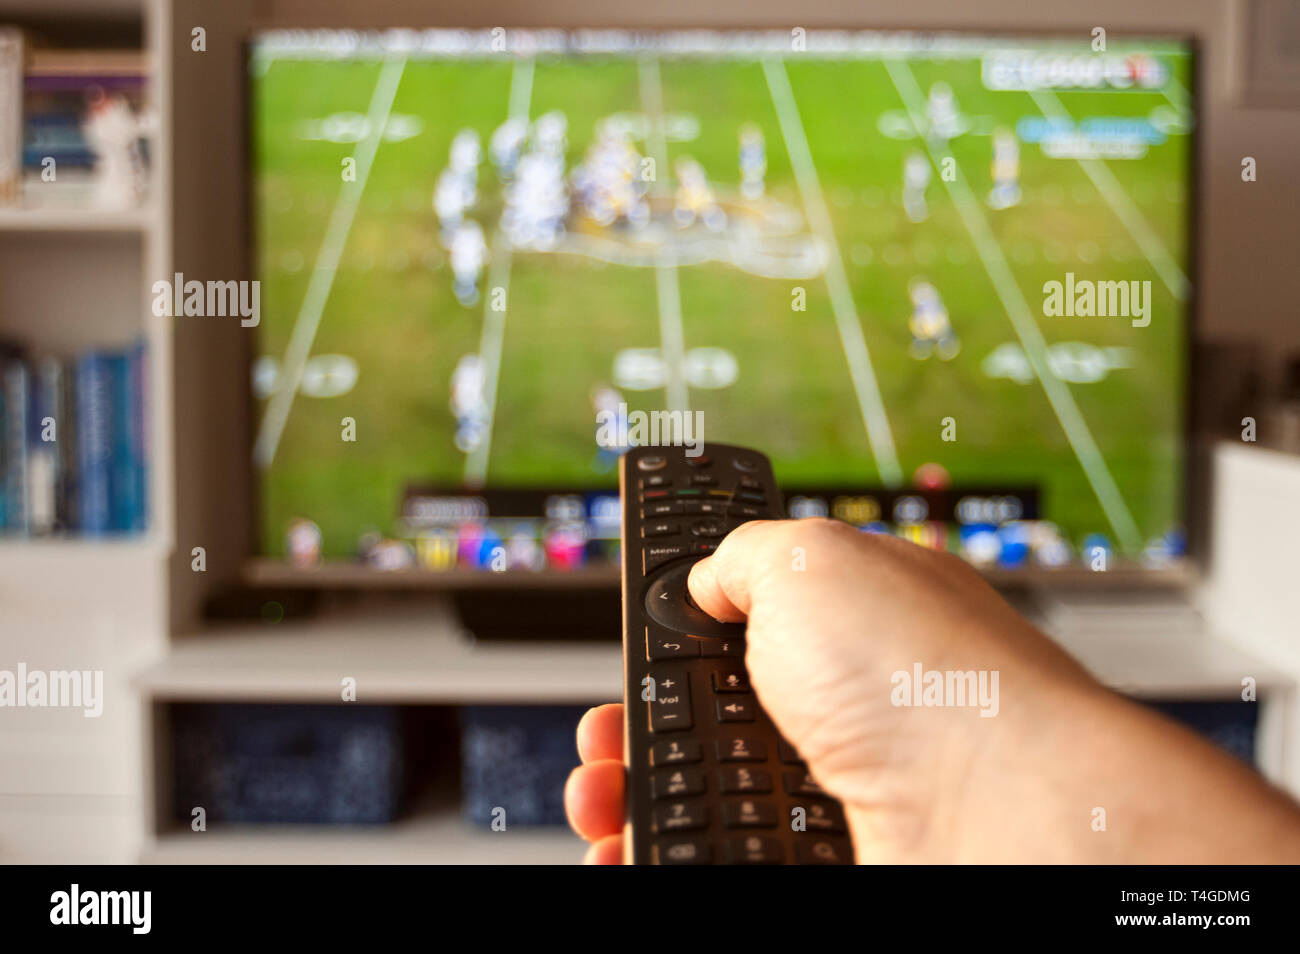 hand holding remote control in front of tv on a sport channel Stock Photo